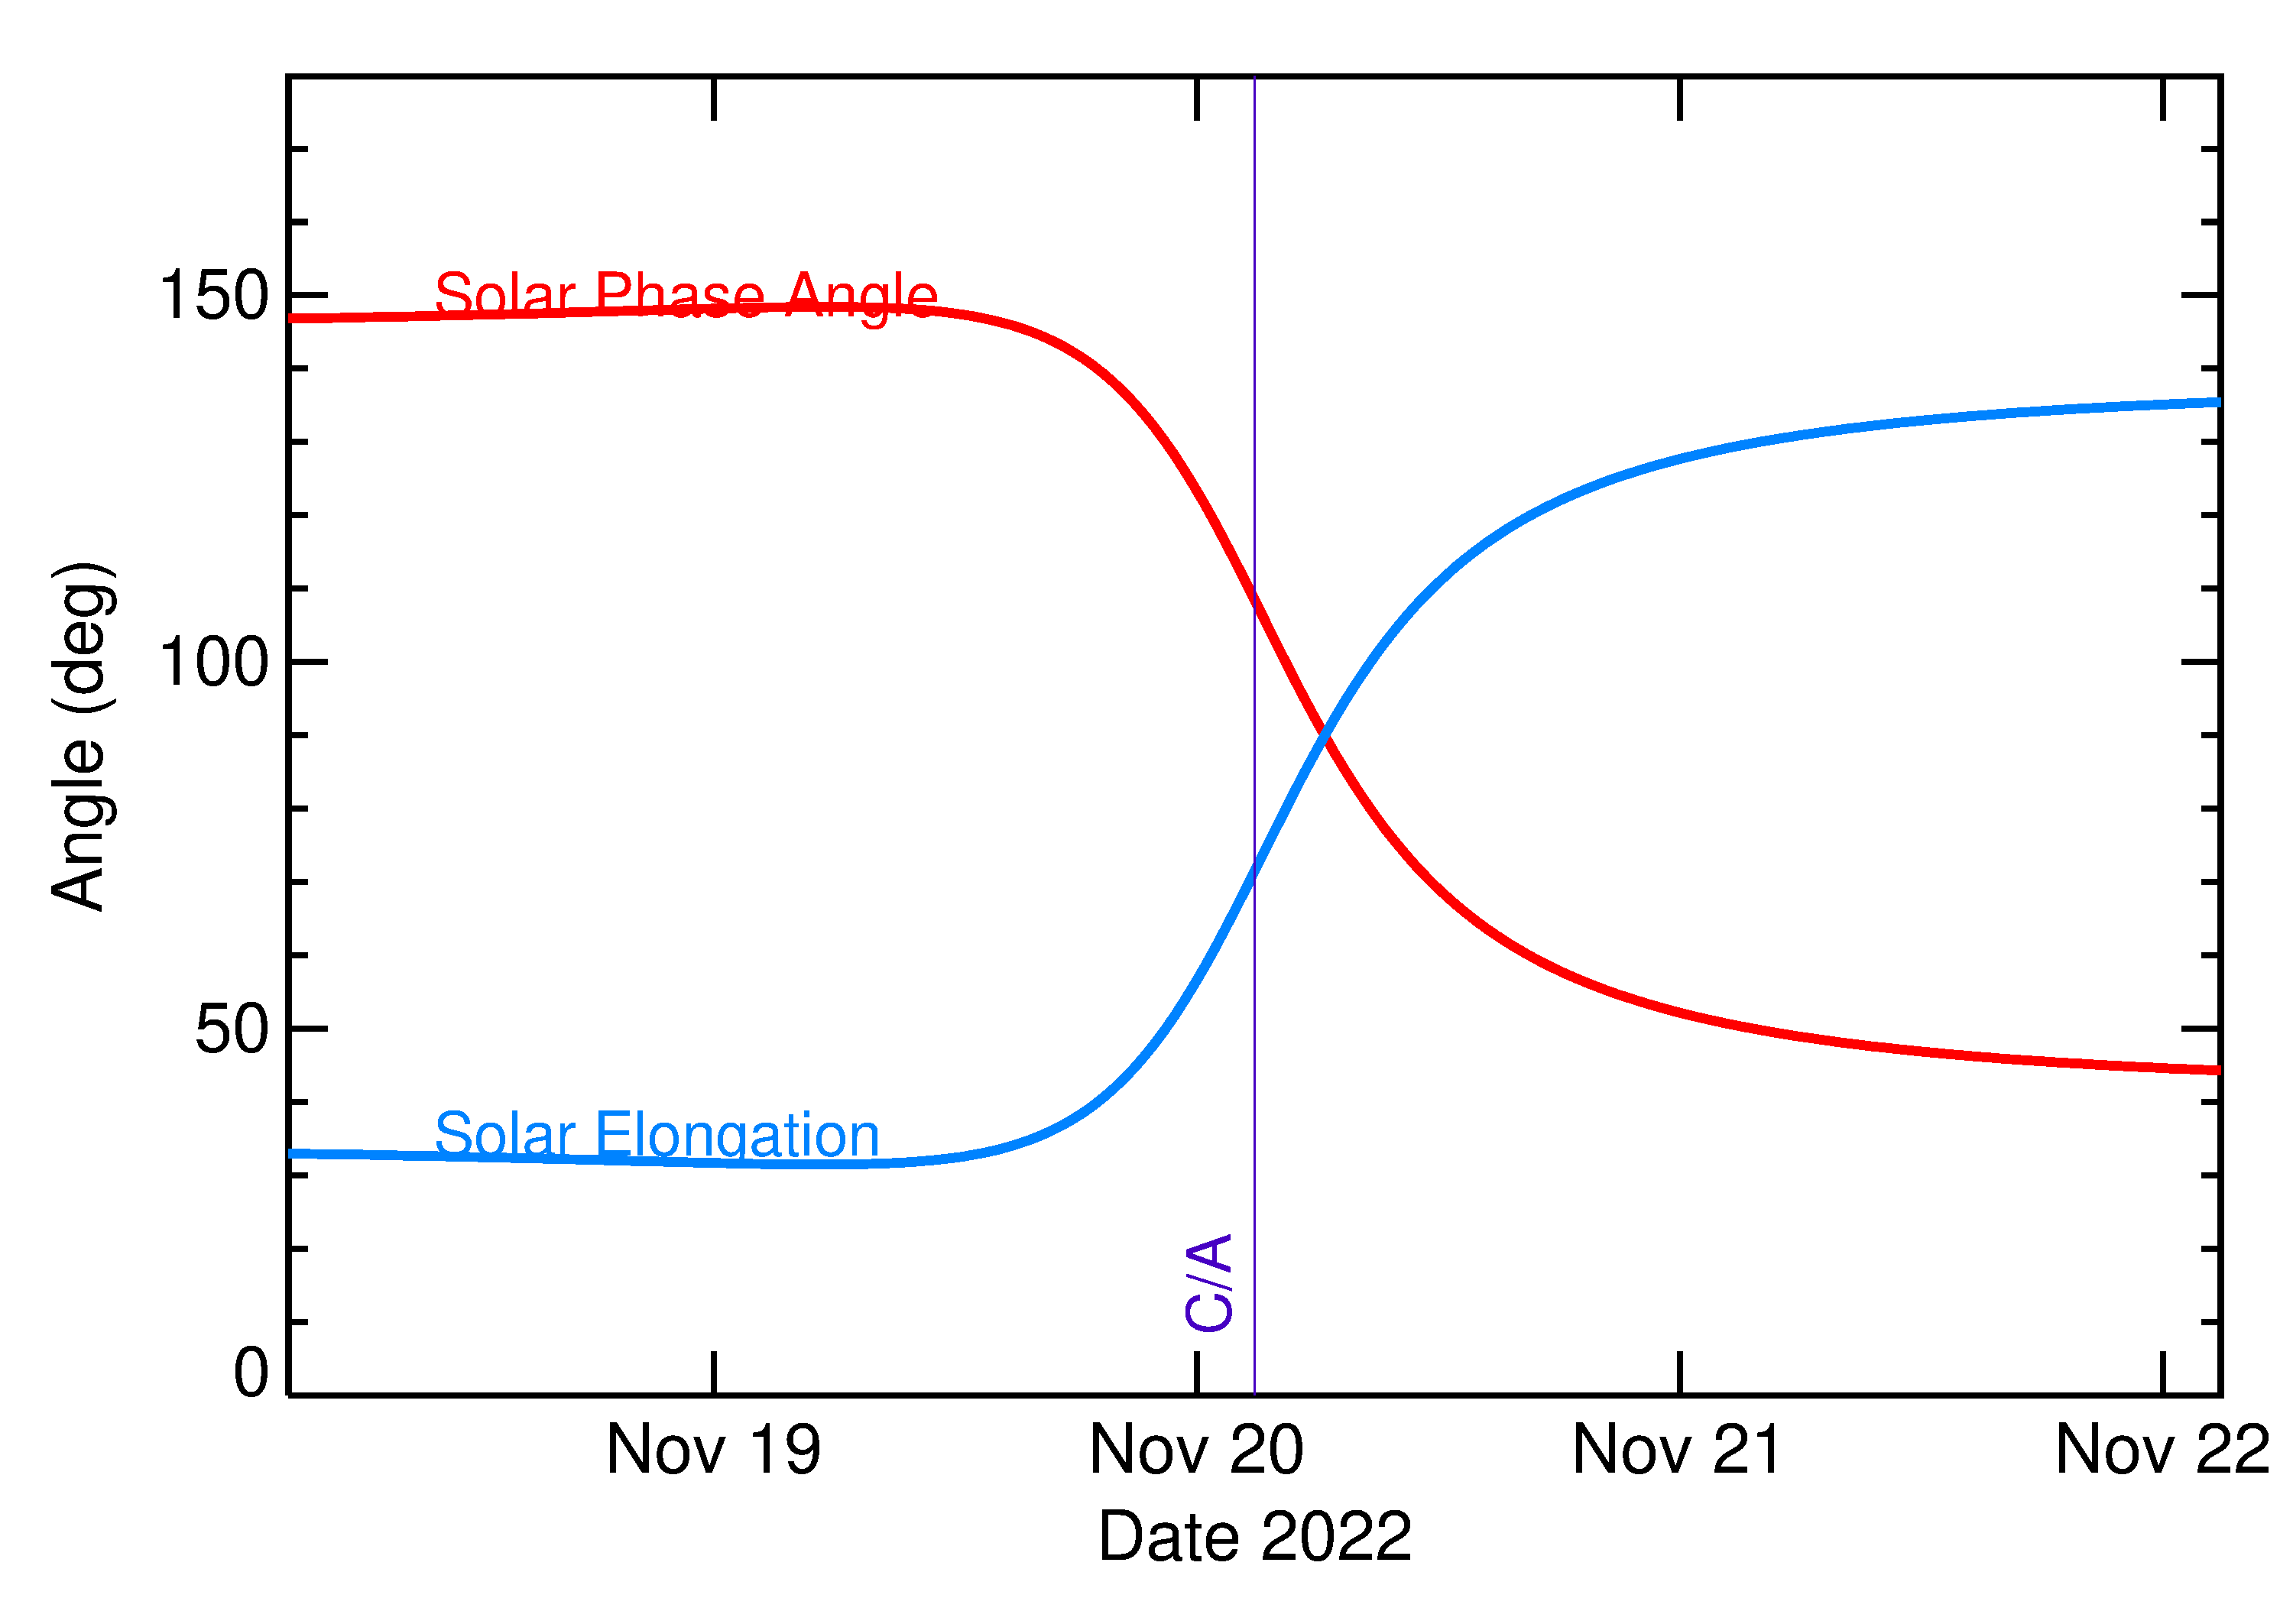 Solar Elongation and Solar Phase Angle of 2022 WM3 in the days around closest approach